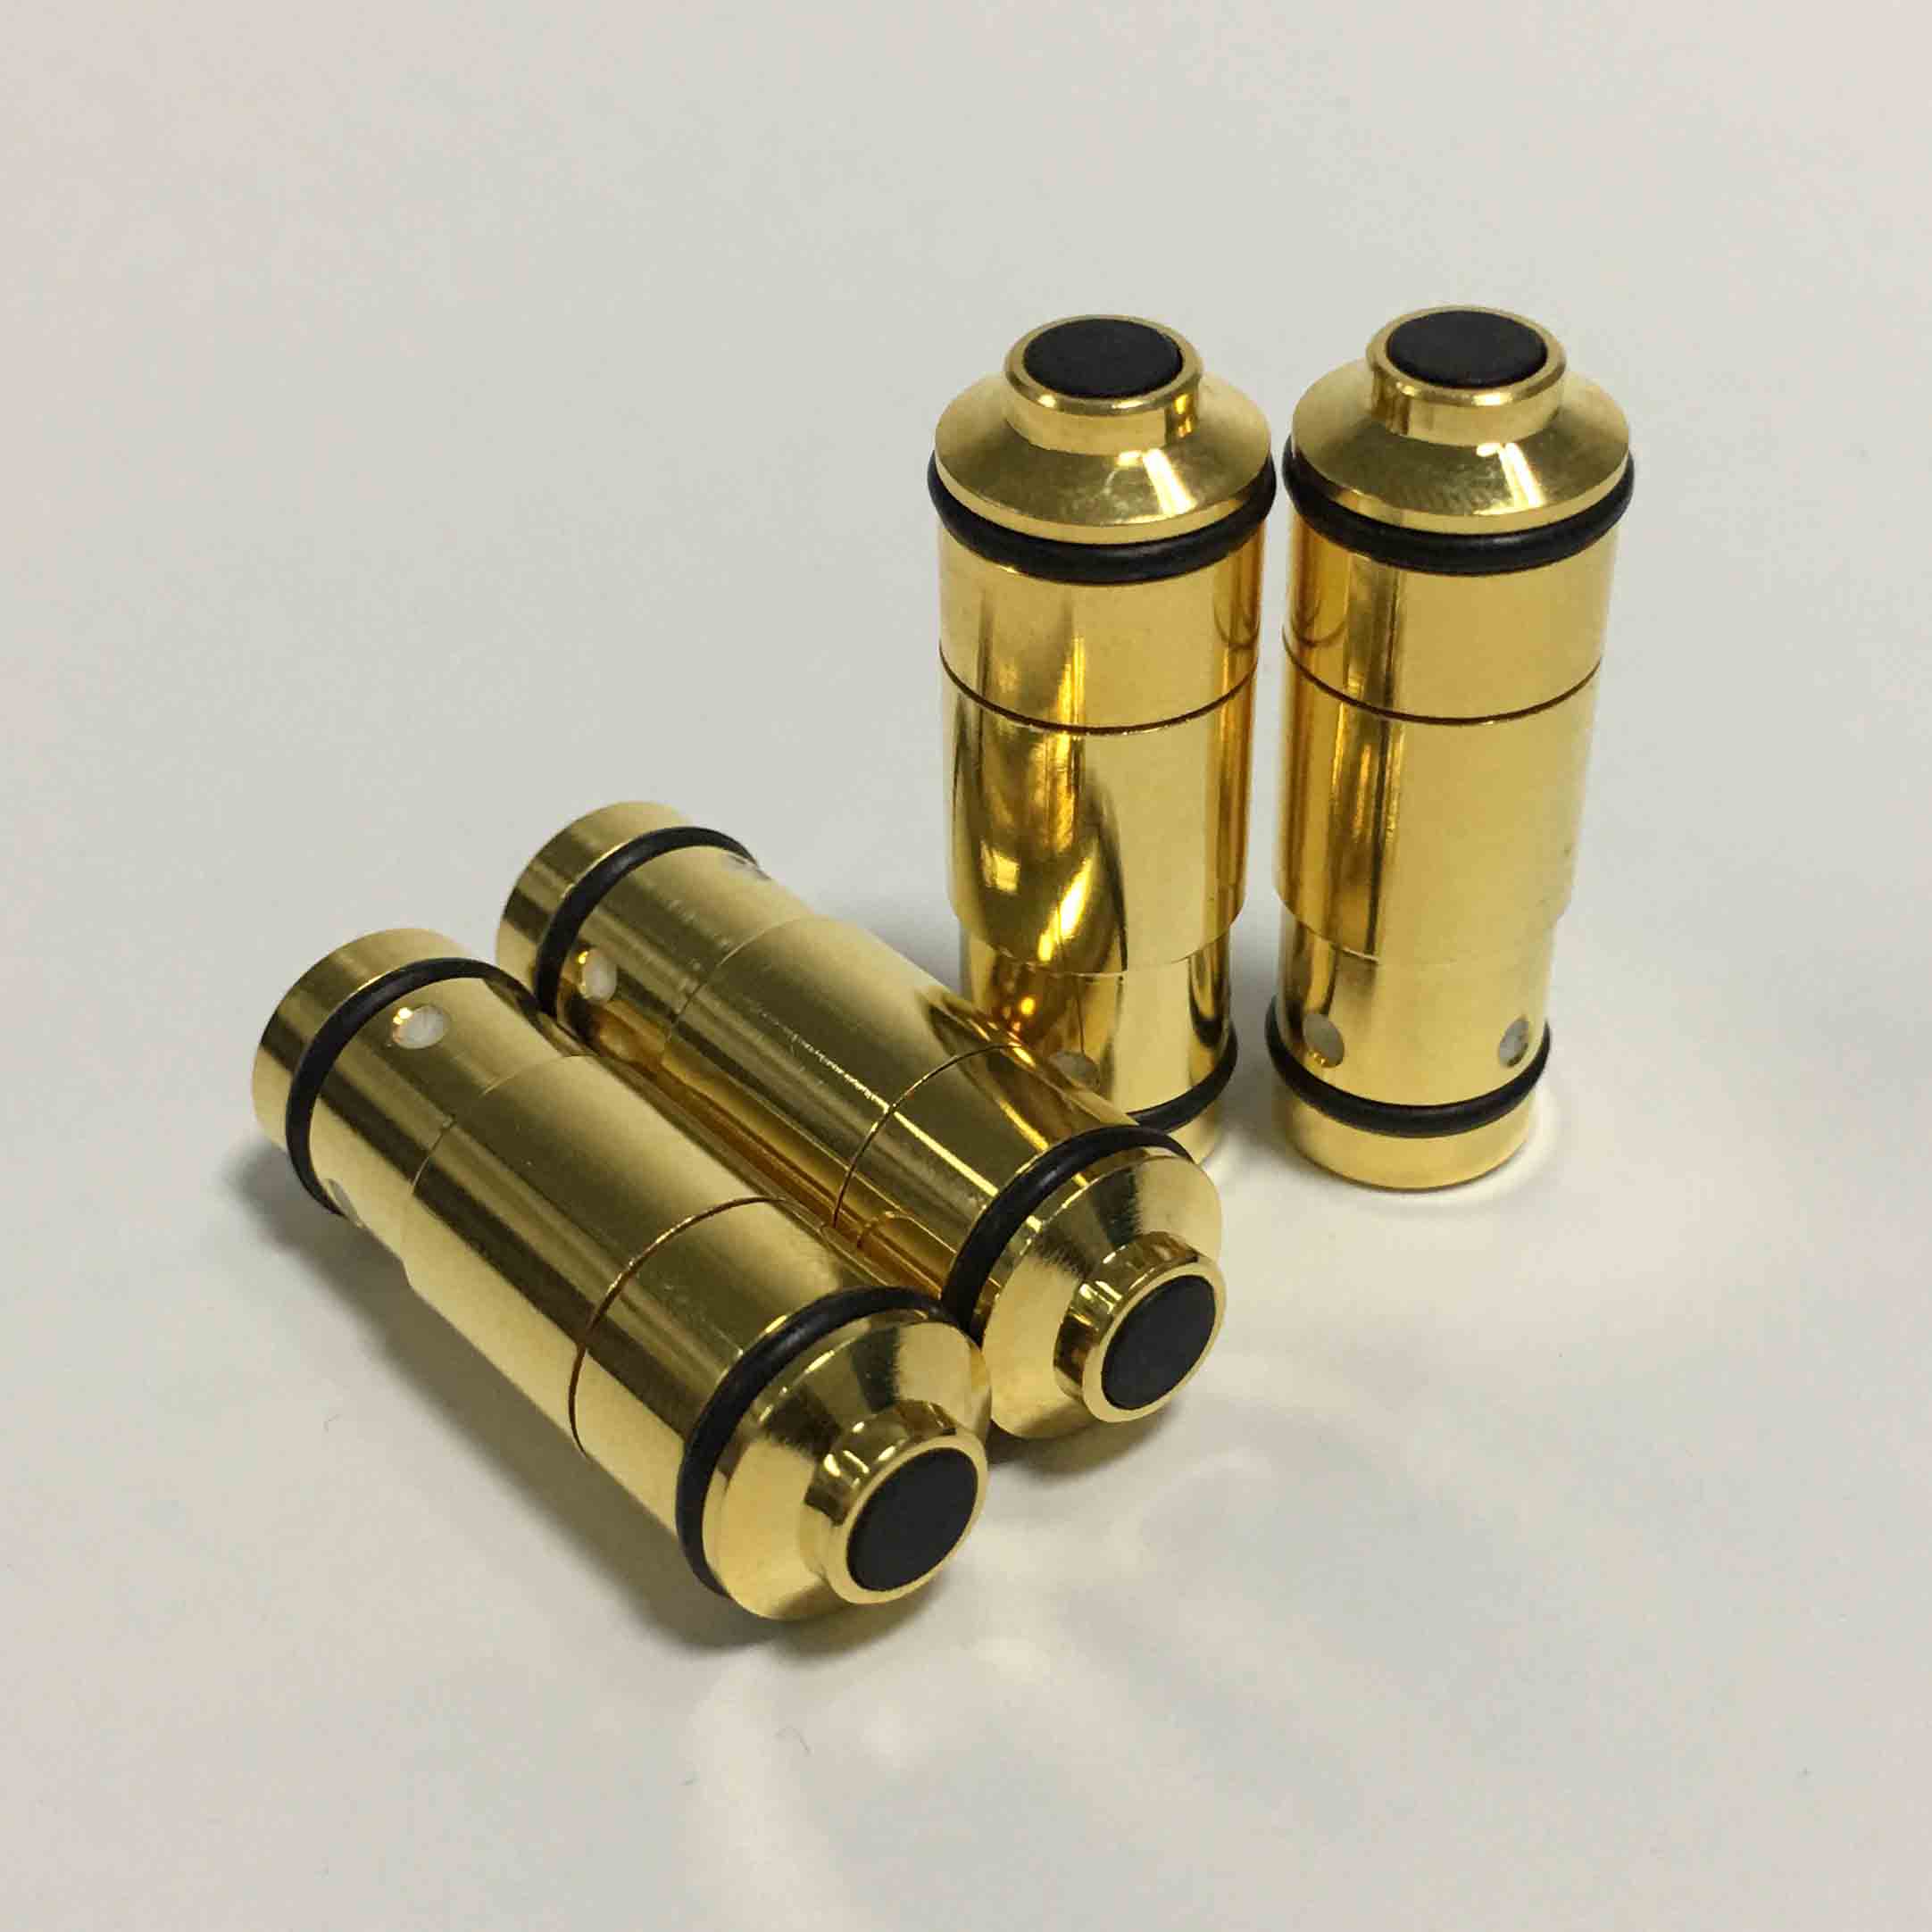 Details about   9mm Laser Training Bullet Cartridge Dry Fire Shooting Simulation 